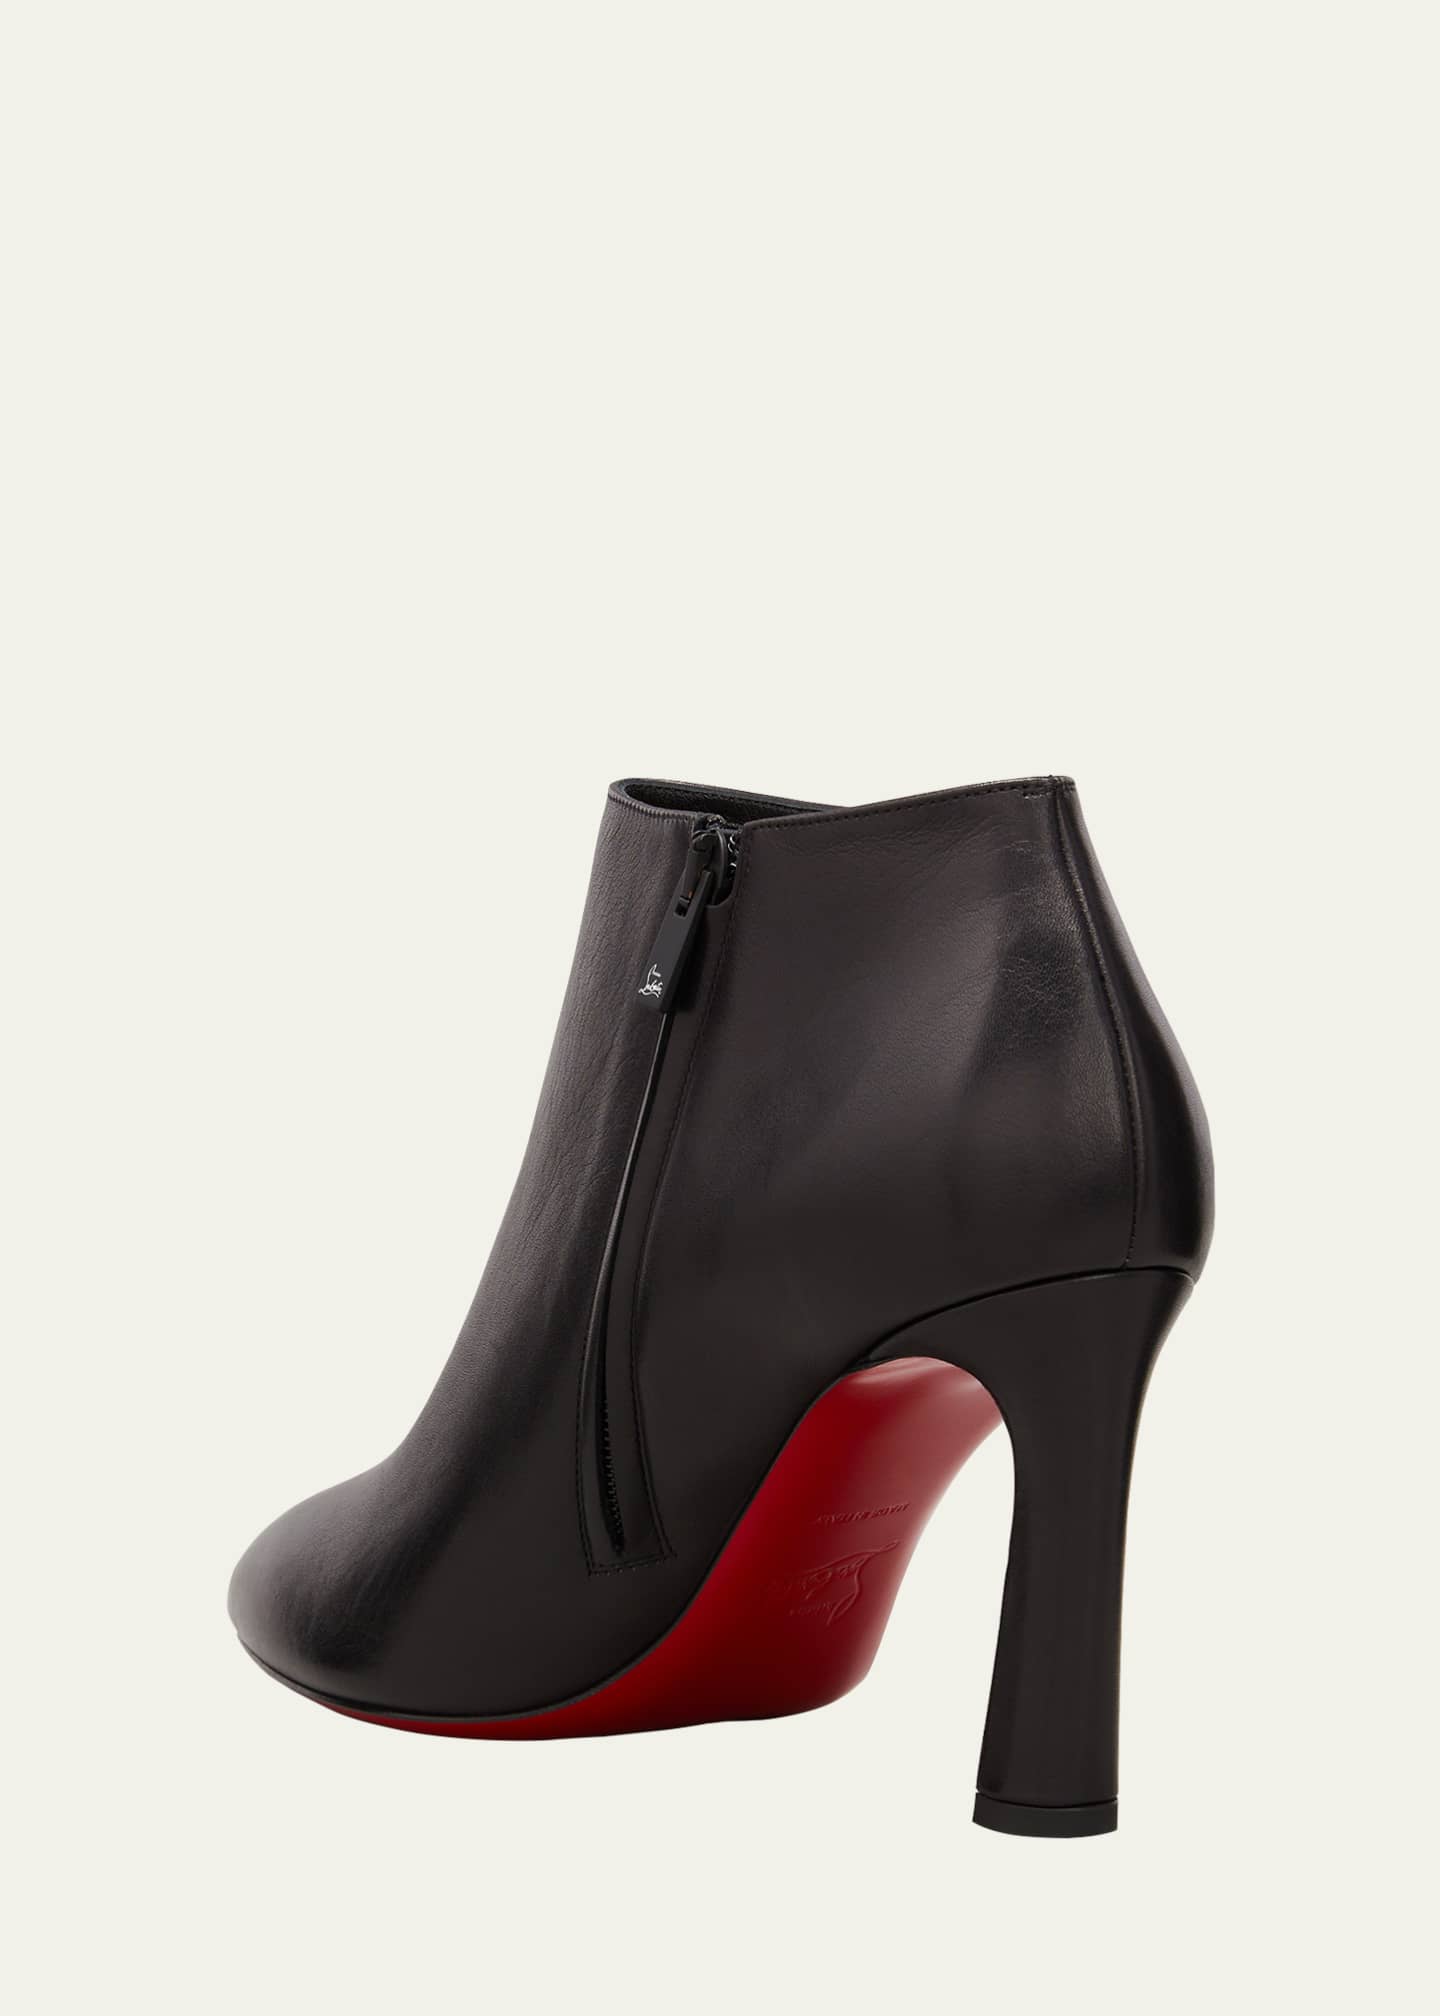 Christian Louboutin Eloise Suede Red Sole Booties - Bergdorf Goodman